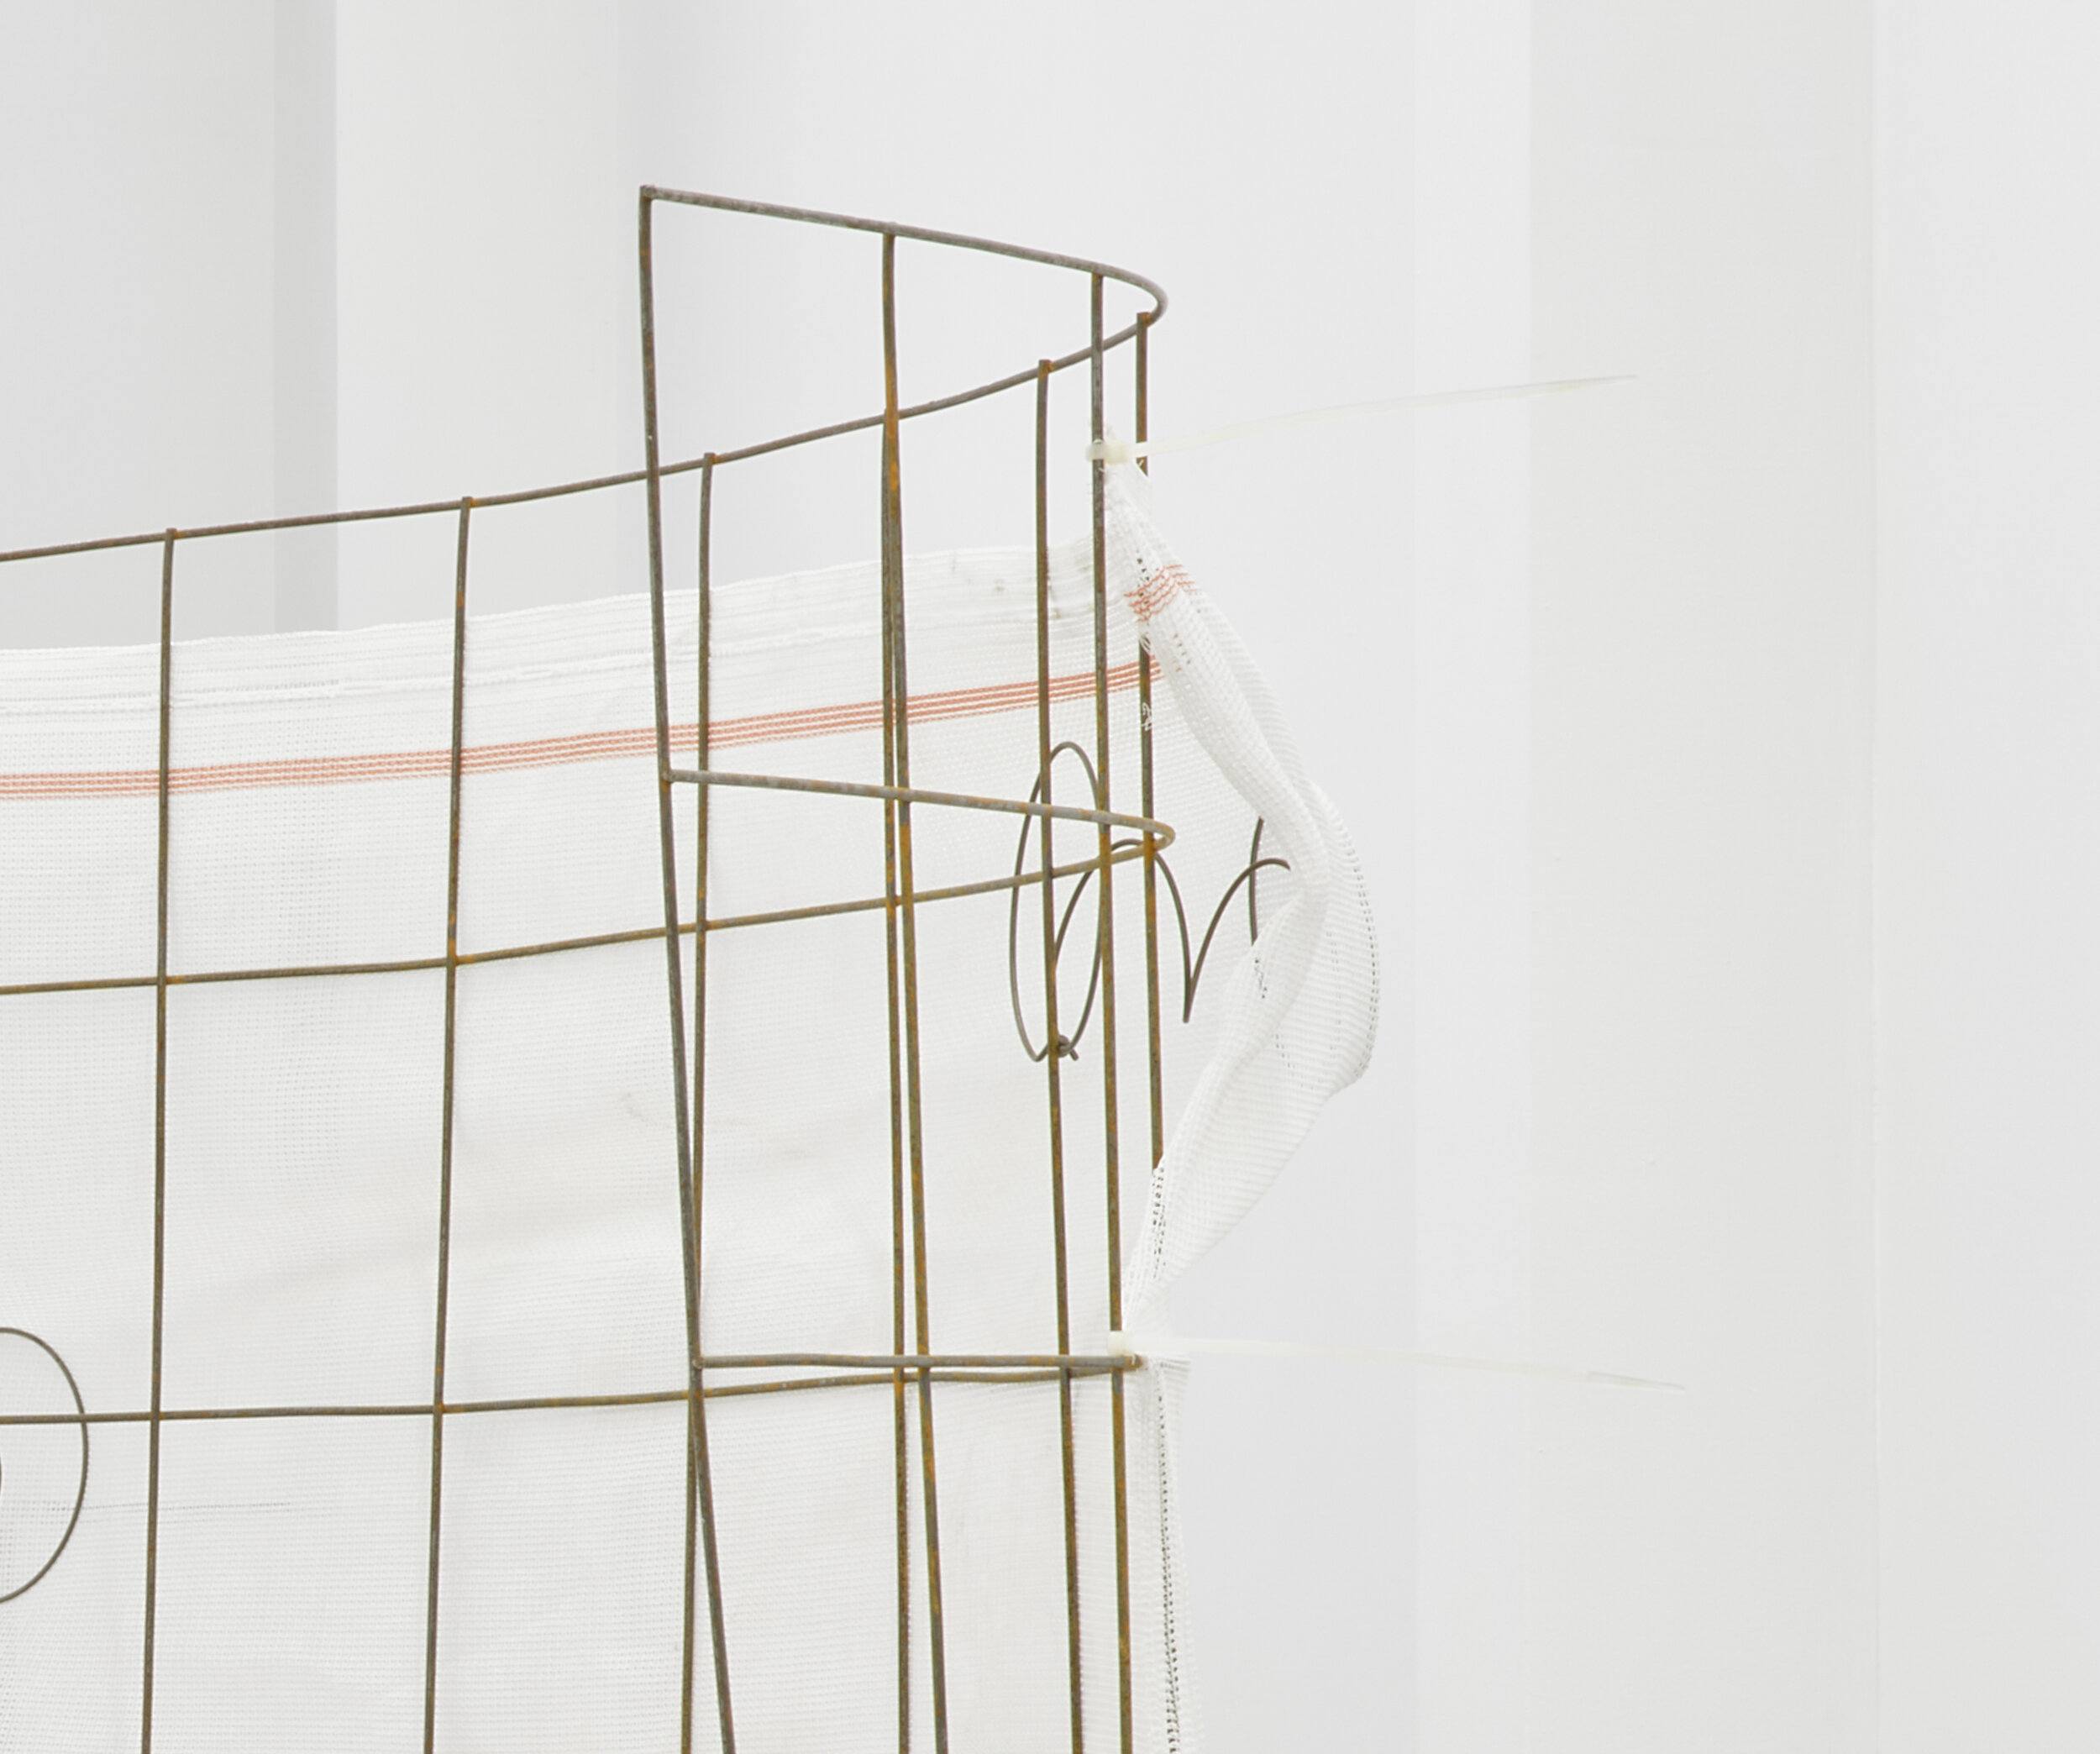  Bat-Ami Rivlin  Untitled (remesh, 4 springs, net, zip locks) , 2019 (detail)   steel wire remesh, springs,  debris safety netting, cable ties  42 x 69 x 27 inches (107 x 175 x 156 cm) BR9 